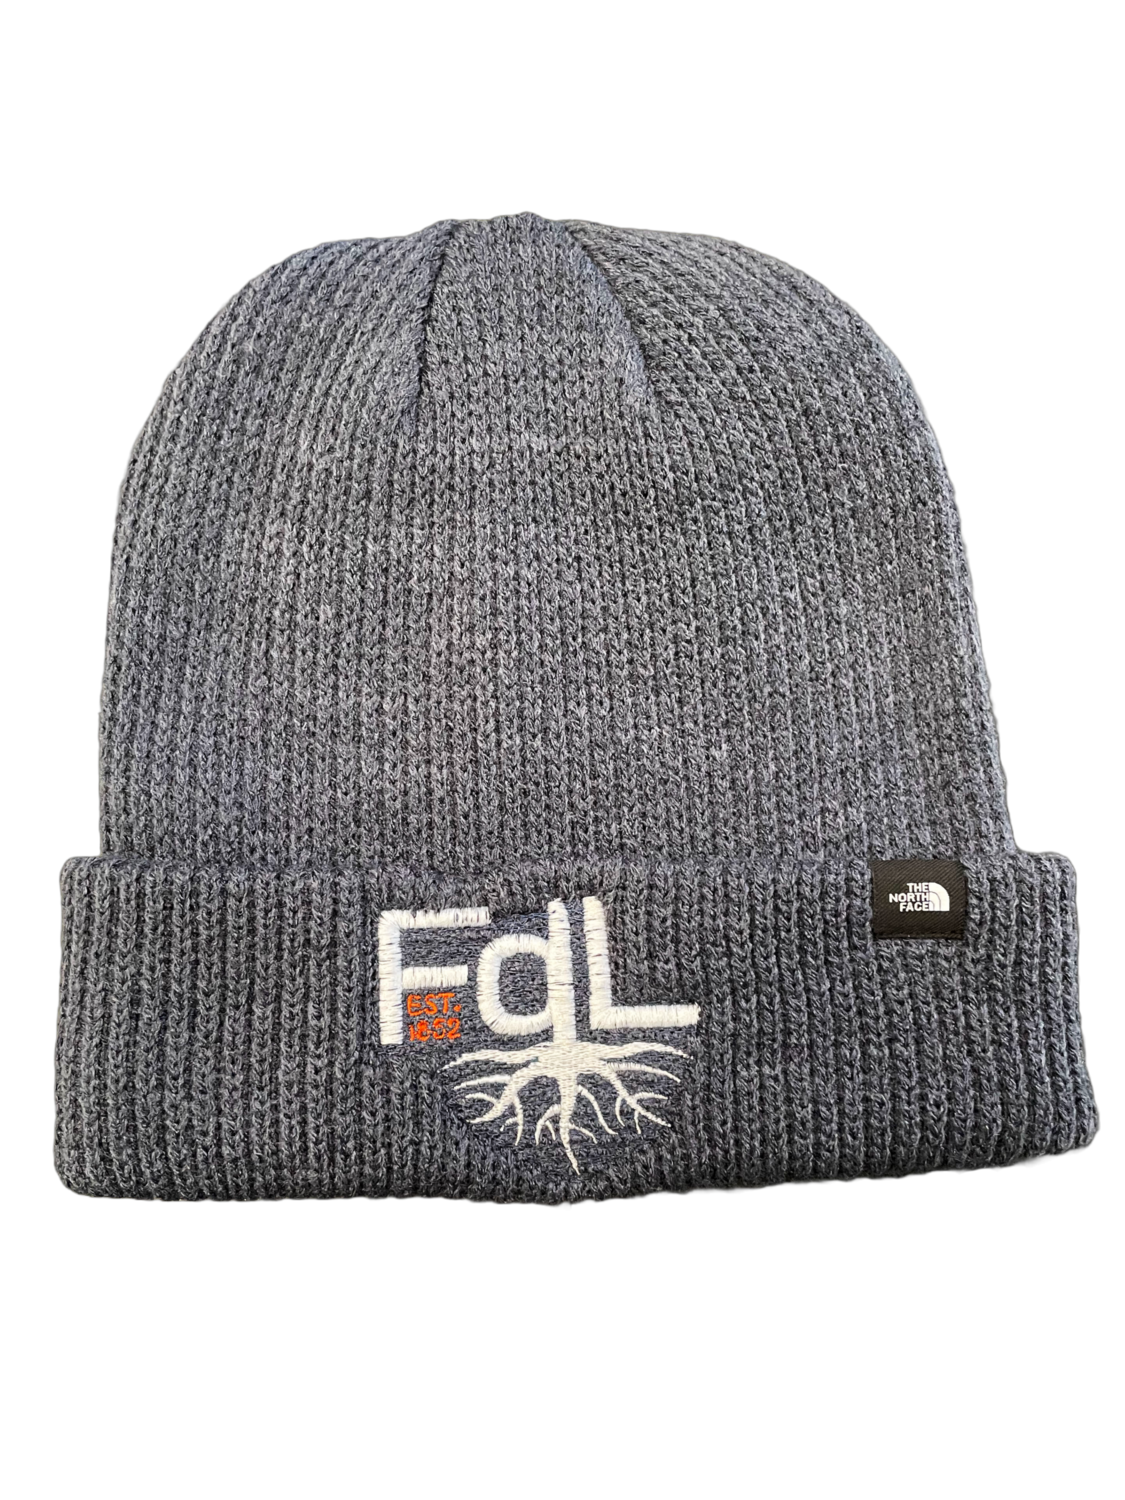 FDL North Face Beanies